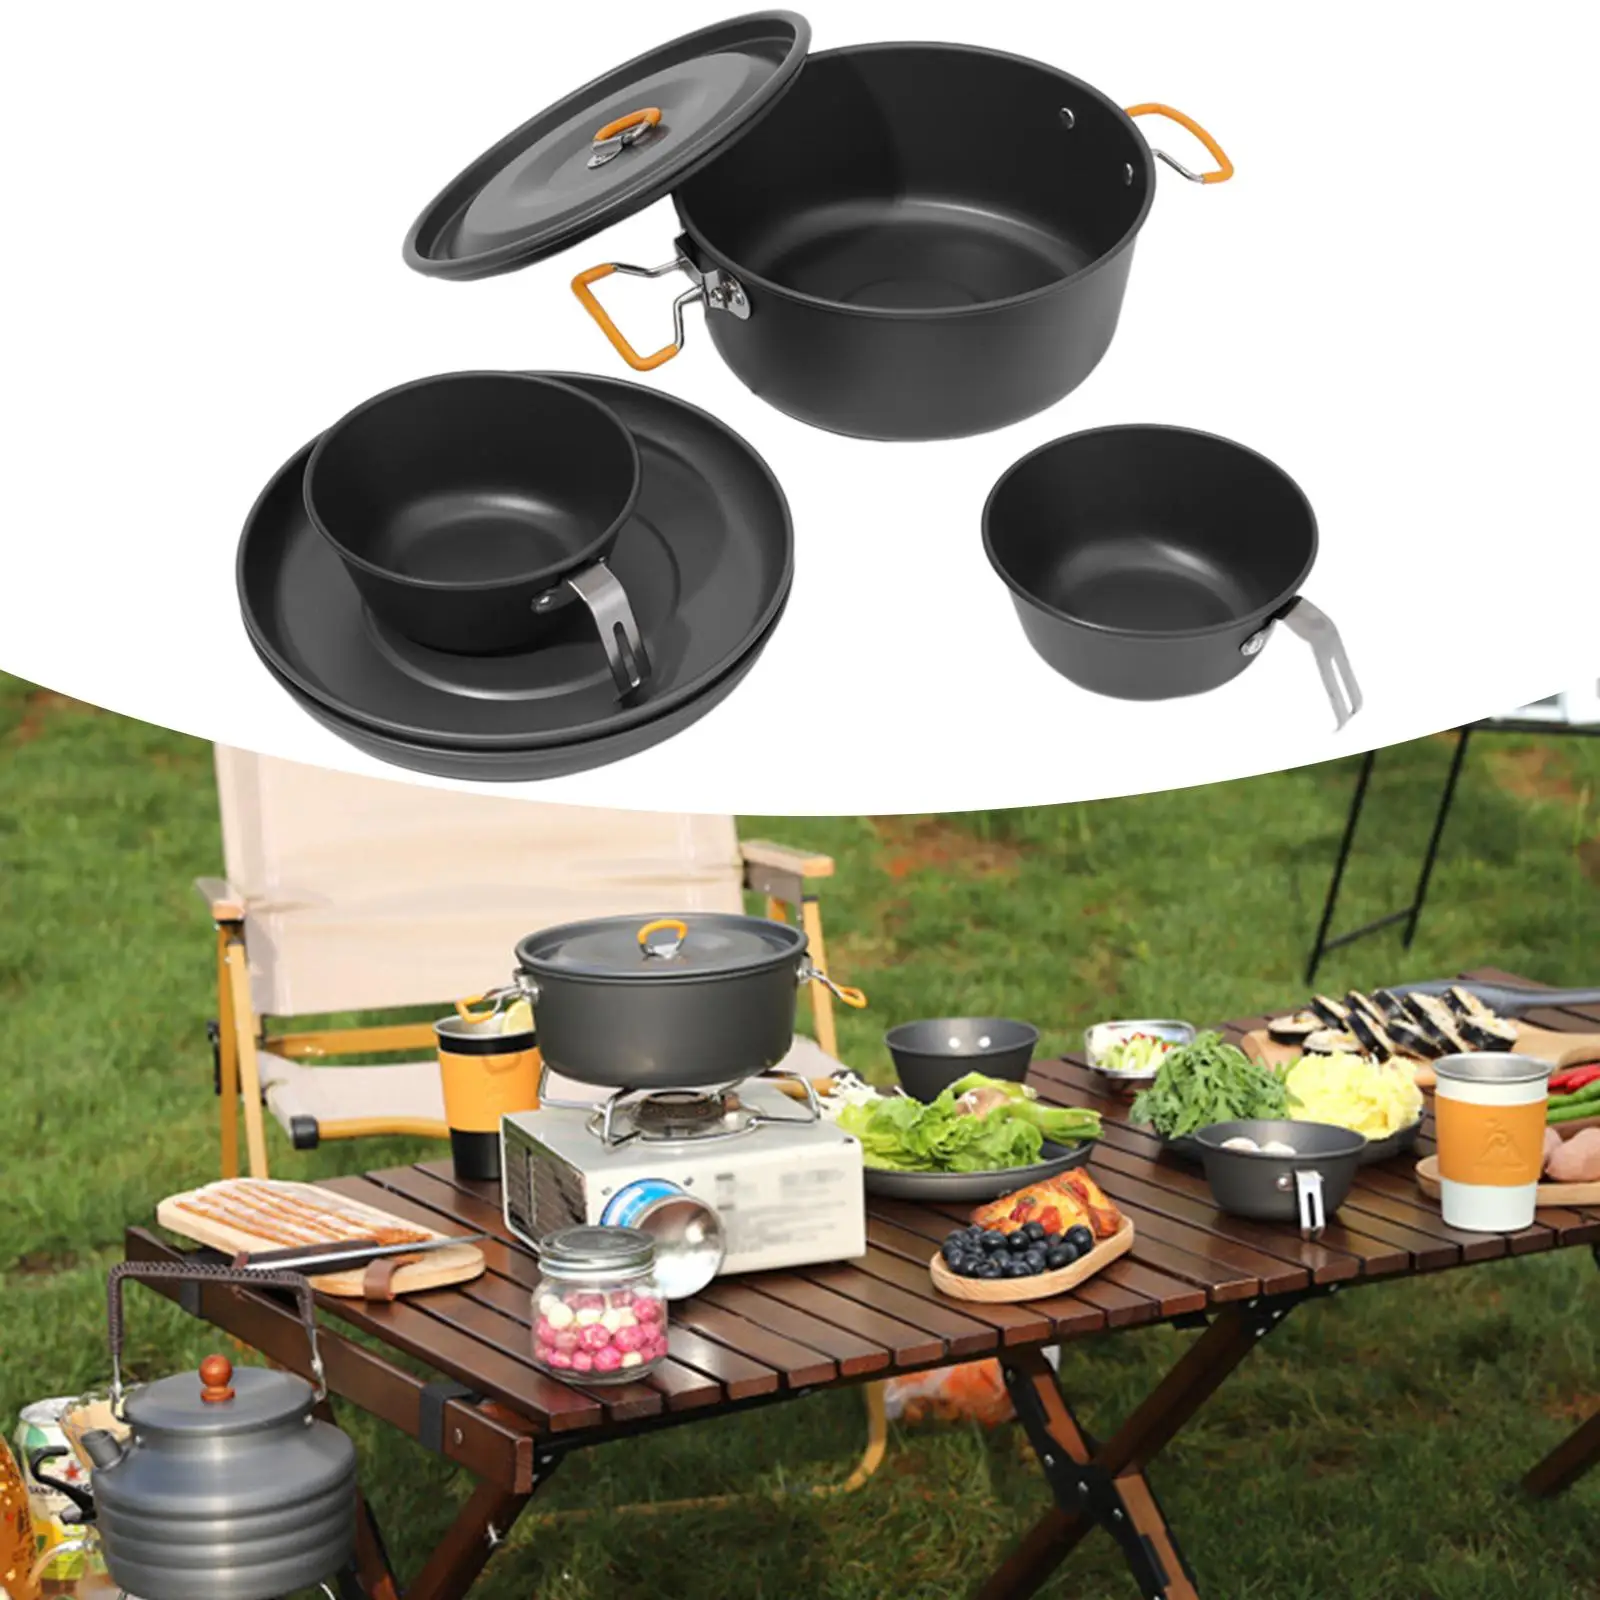 Camping Cookware Set Portable Hot Pot Travel Cutlery Utensils Stock Pot Camping Pot for Hiking Survival Fishing Dinner Travel